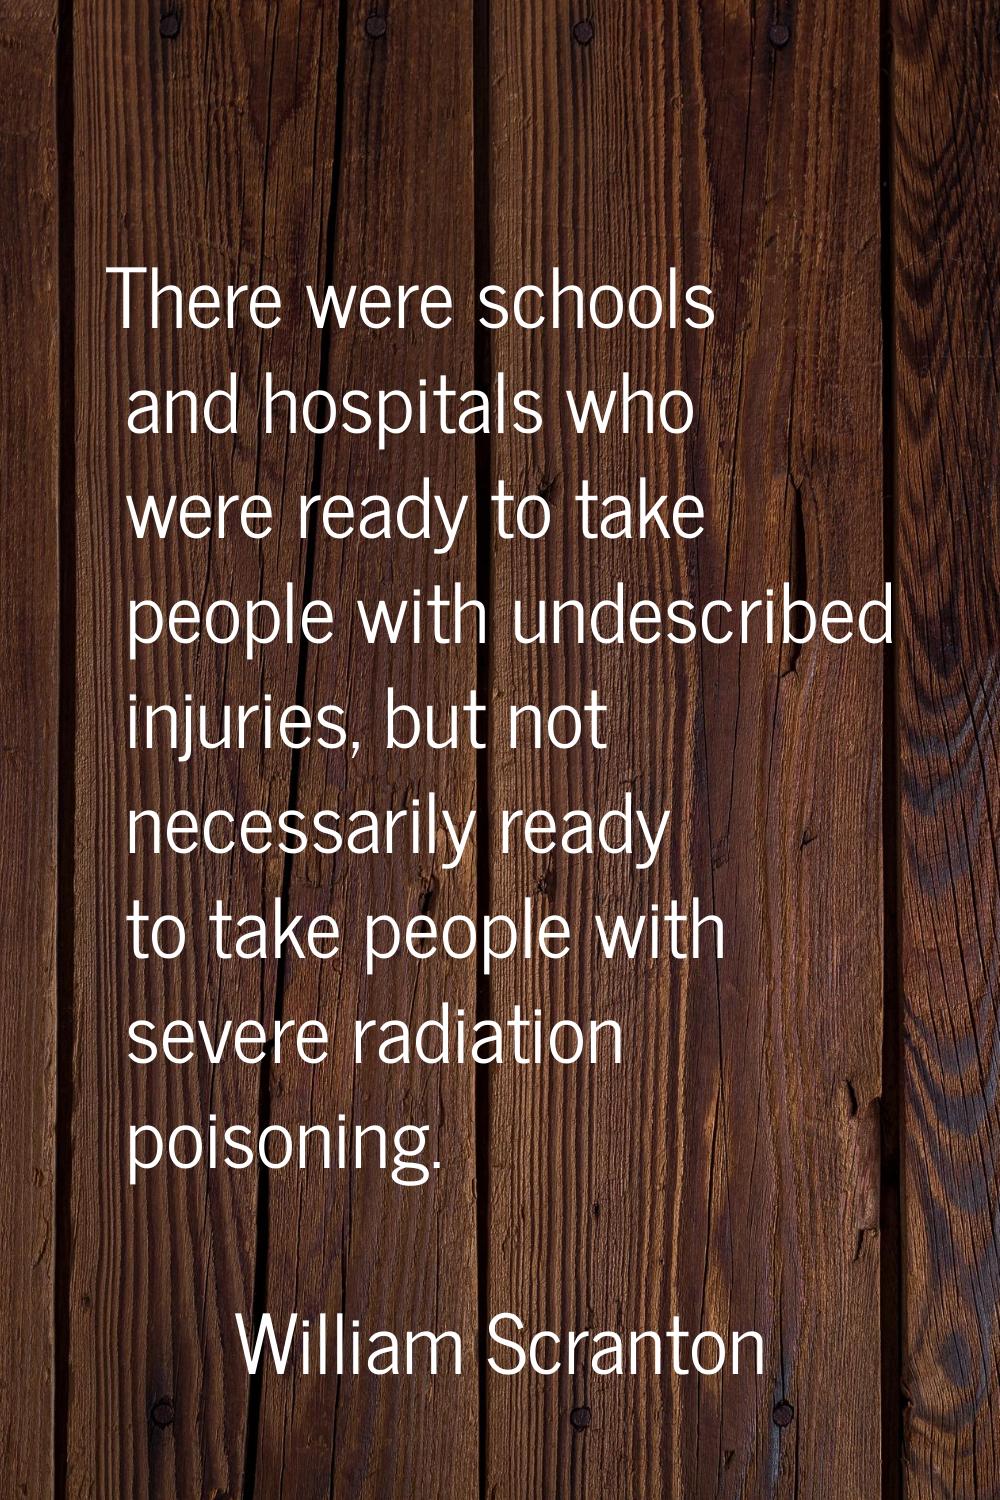 There were schools and hospitals who were ready to take people with undescribed injuries, but not n